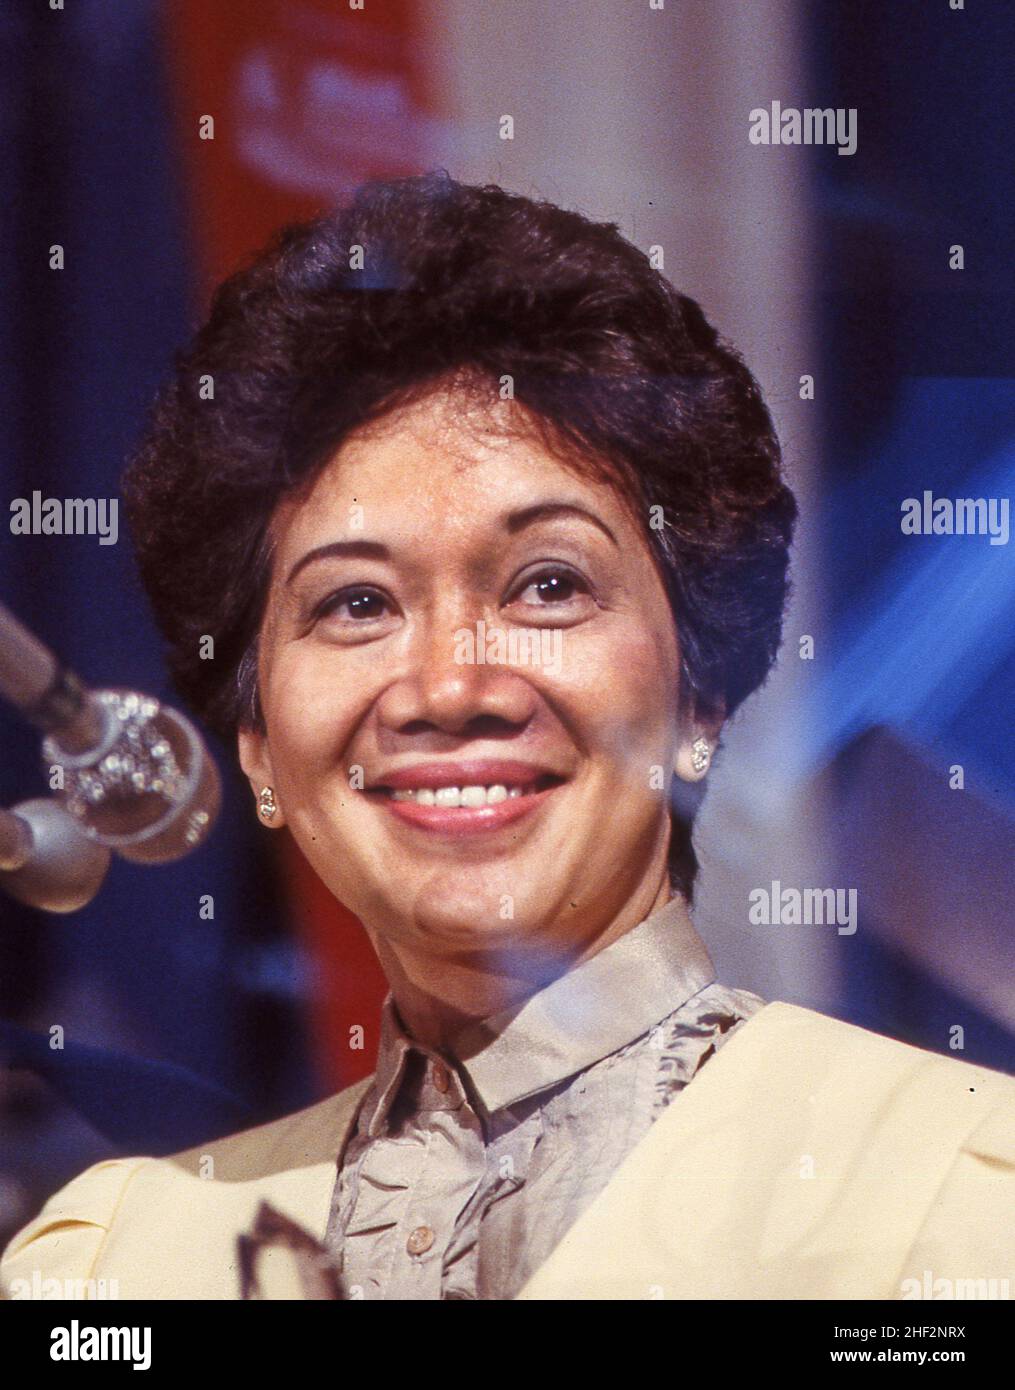 Corazon Aquino, Filipina politician who served as the 11th president of the Philippines from 1986 to 1992.  Photograph by Dennis Brack Stock Photo